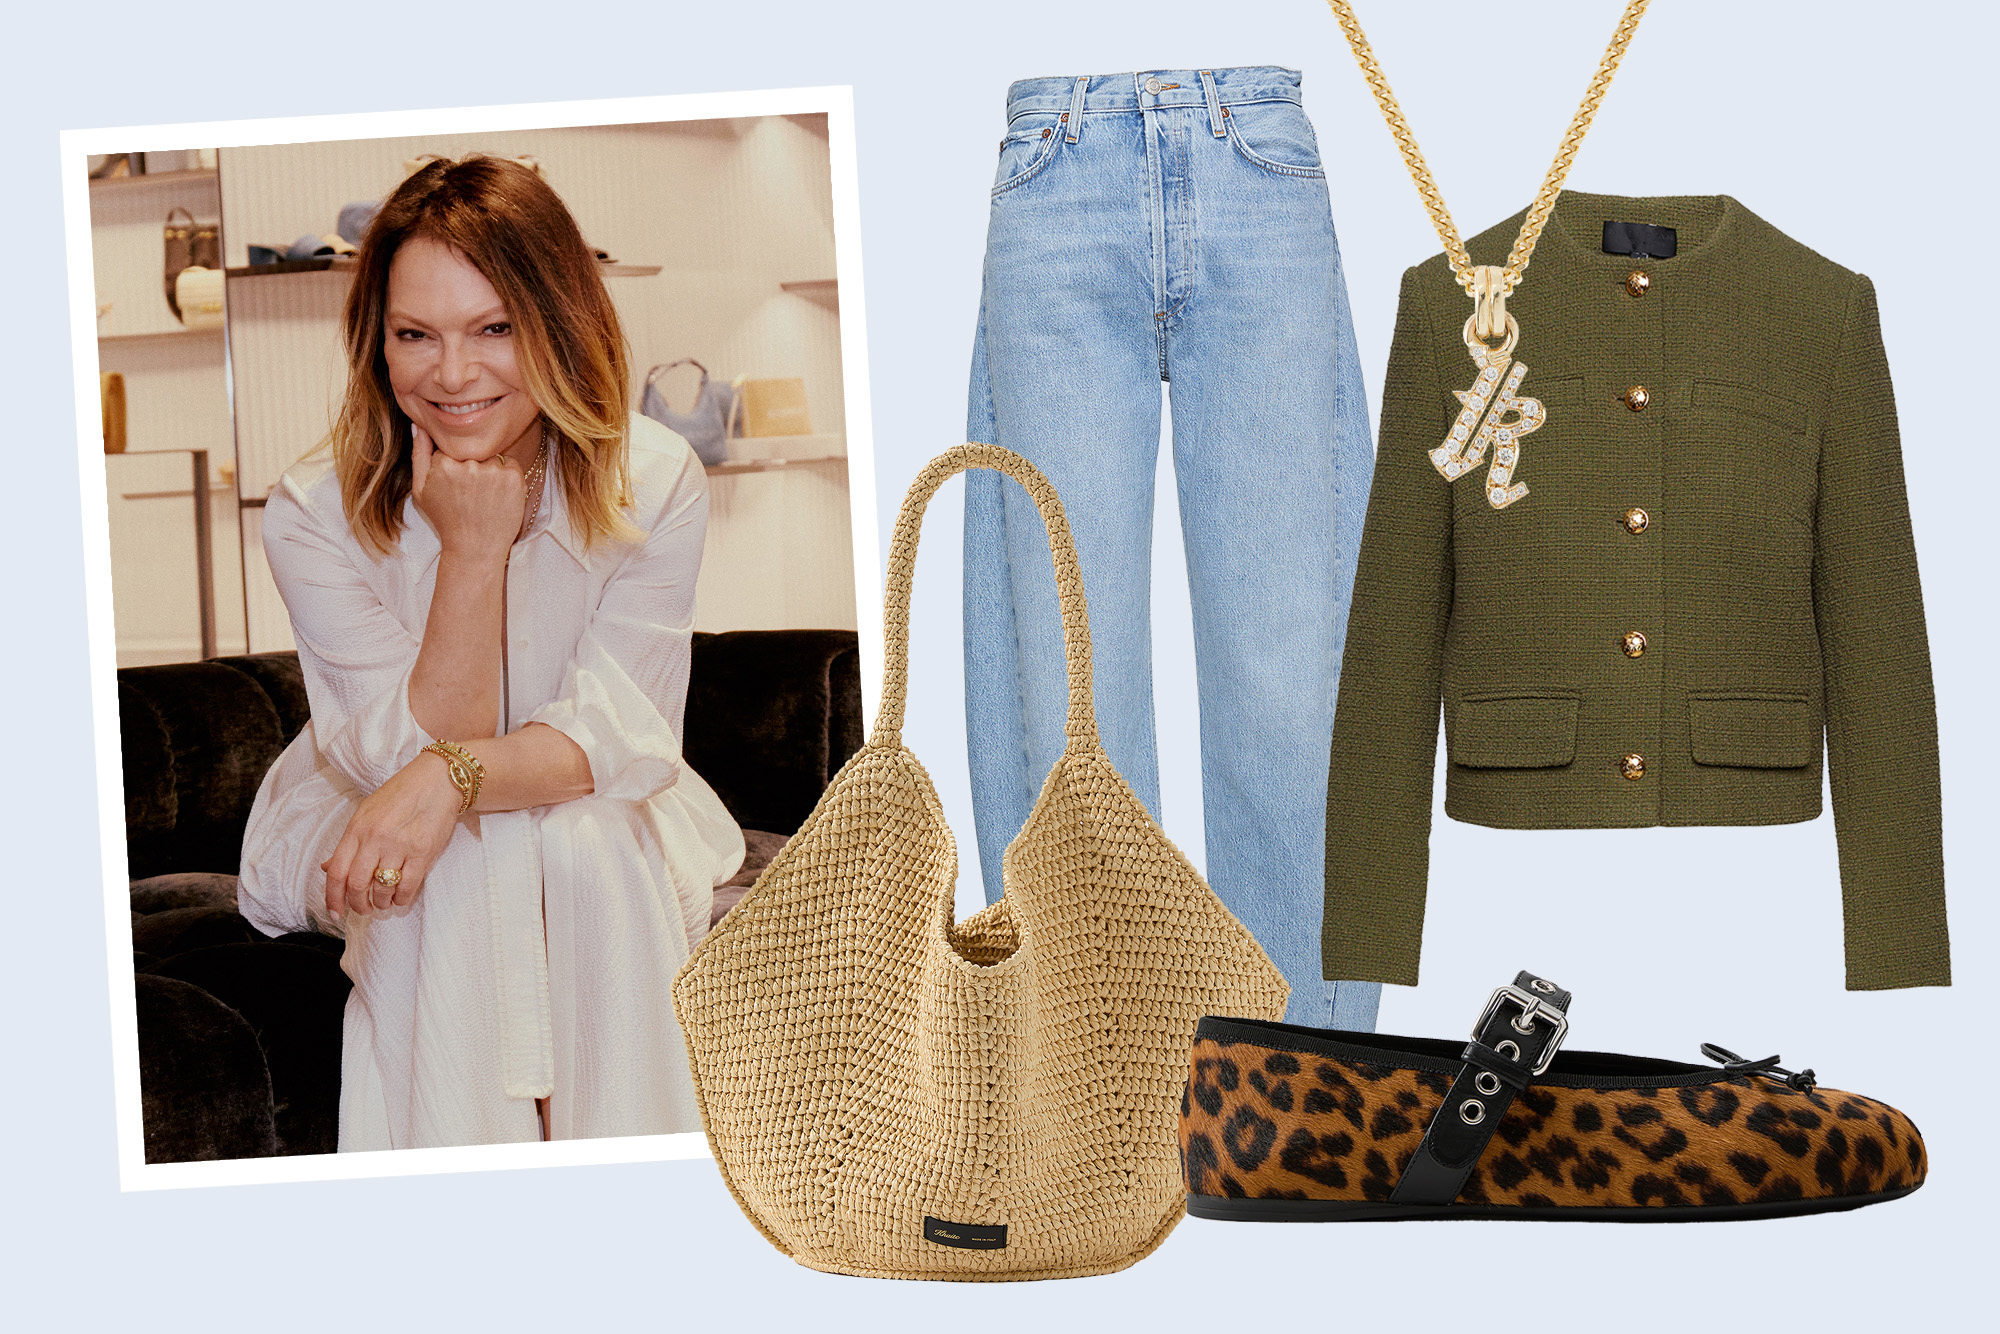 A collage of Elyse Walker and her Mother's Day selections, including jeans, a green jacket, Miu Miu cheetah print flats, a raffia bag, and an initial necklace with an R.